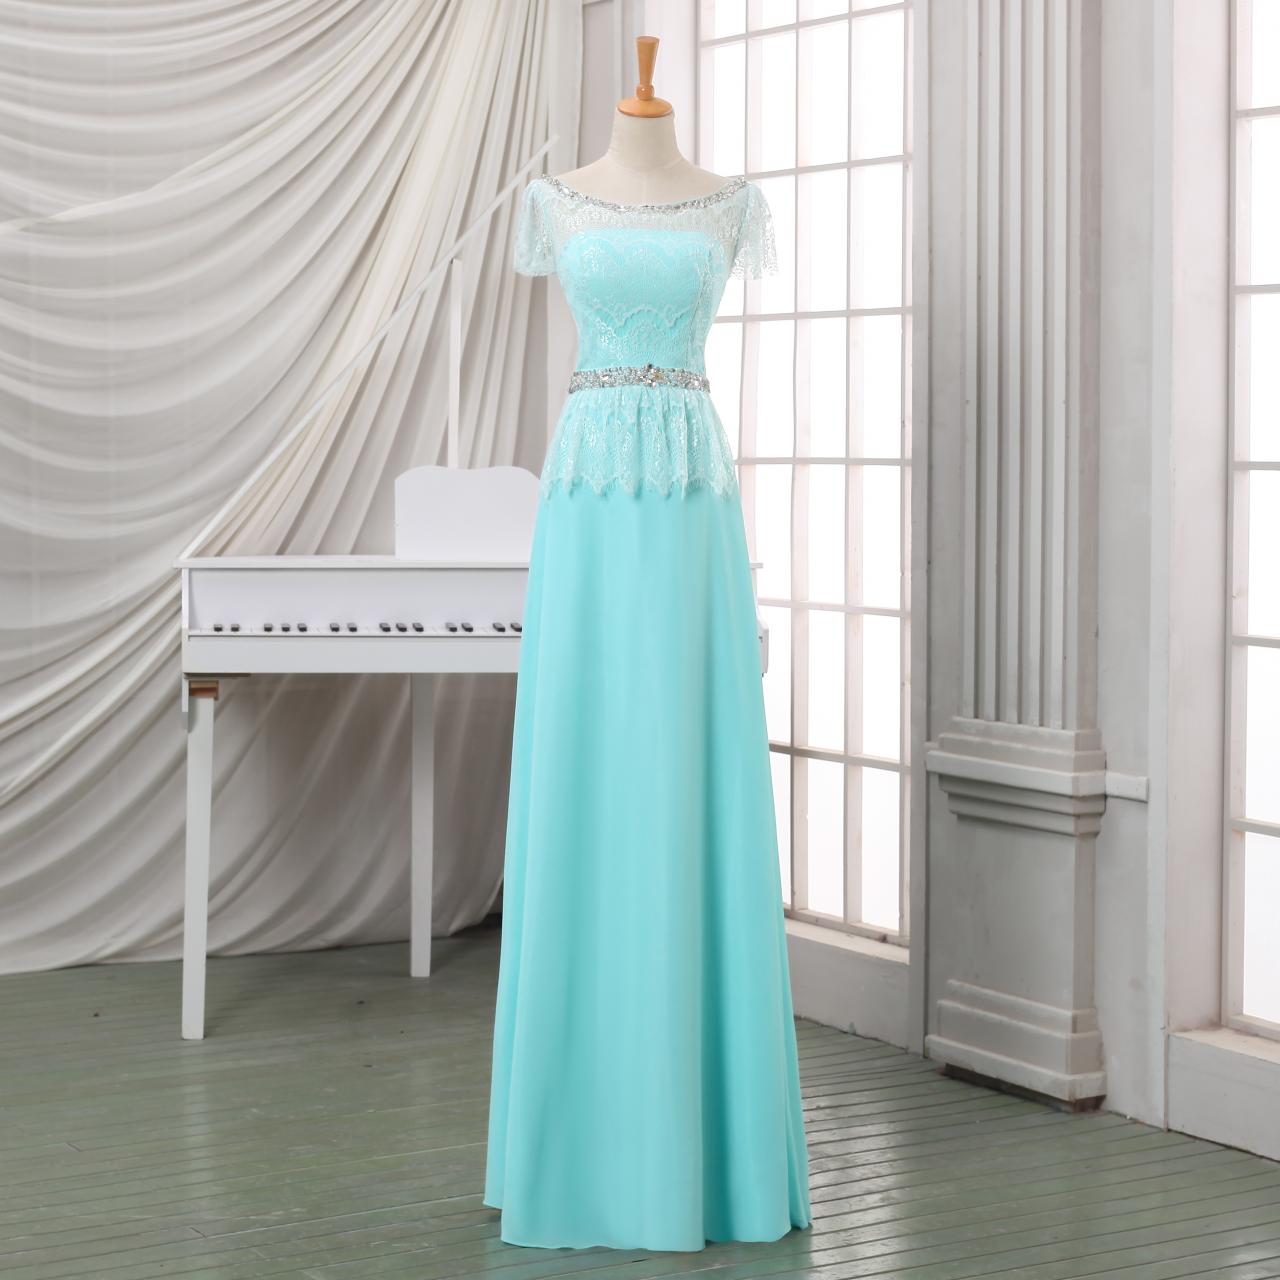 Prom Dress/evening Dress With Beadings, Baby Blue Long Homecoming Dress/evening Dress/party Dress,plus Size Evening Dress.